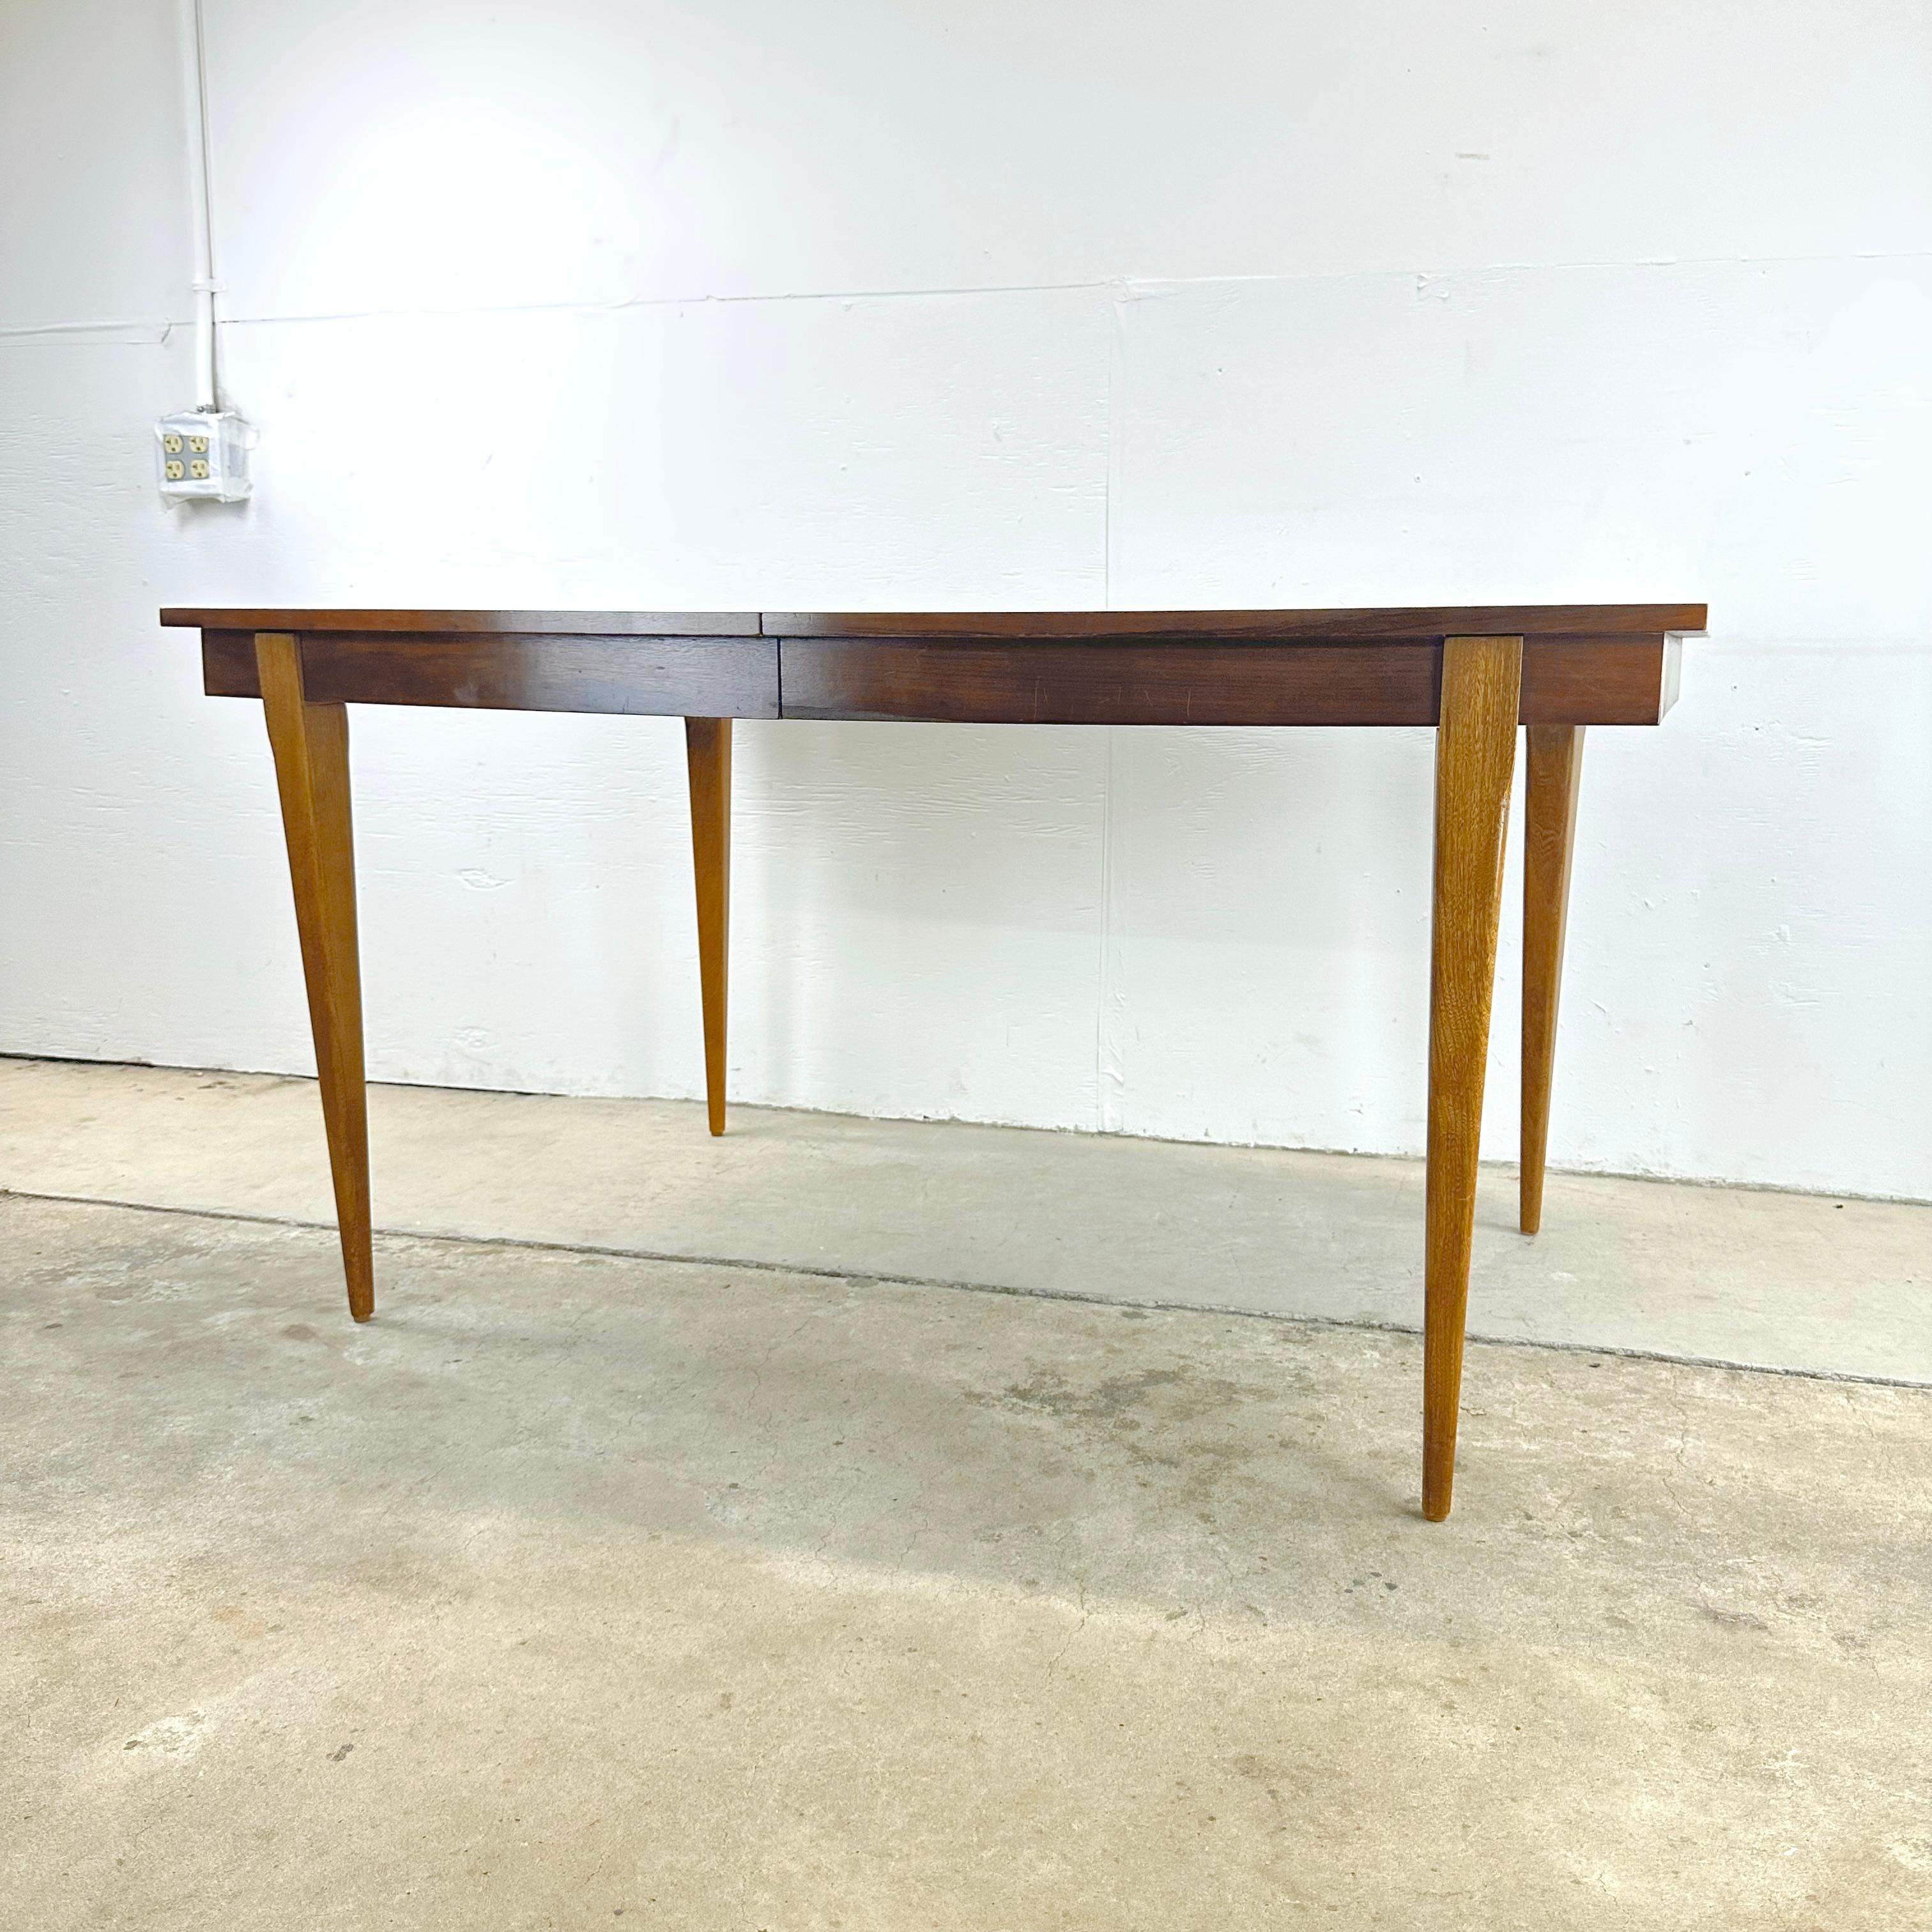 Are you on the hunt for a dining table that seamlessly combines classic design, versatility, and a touch of mid-century charm? Look no further than this 1960s Mid-Century Modern Walnut Dining Table with Leaf, attributed to the Young Manufacturing